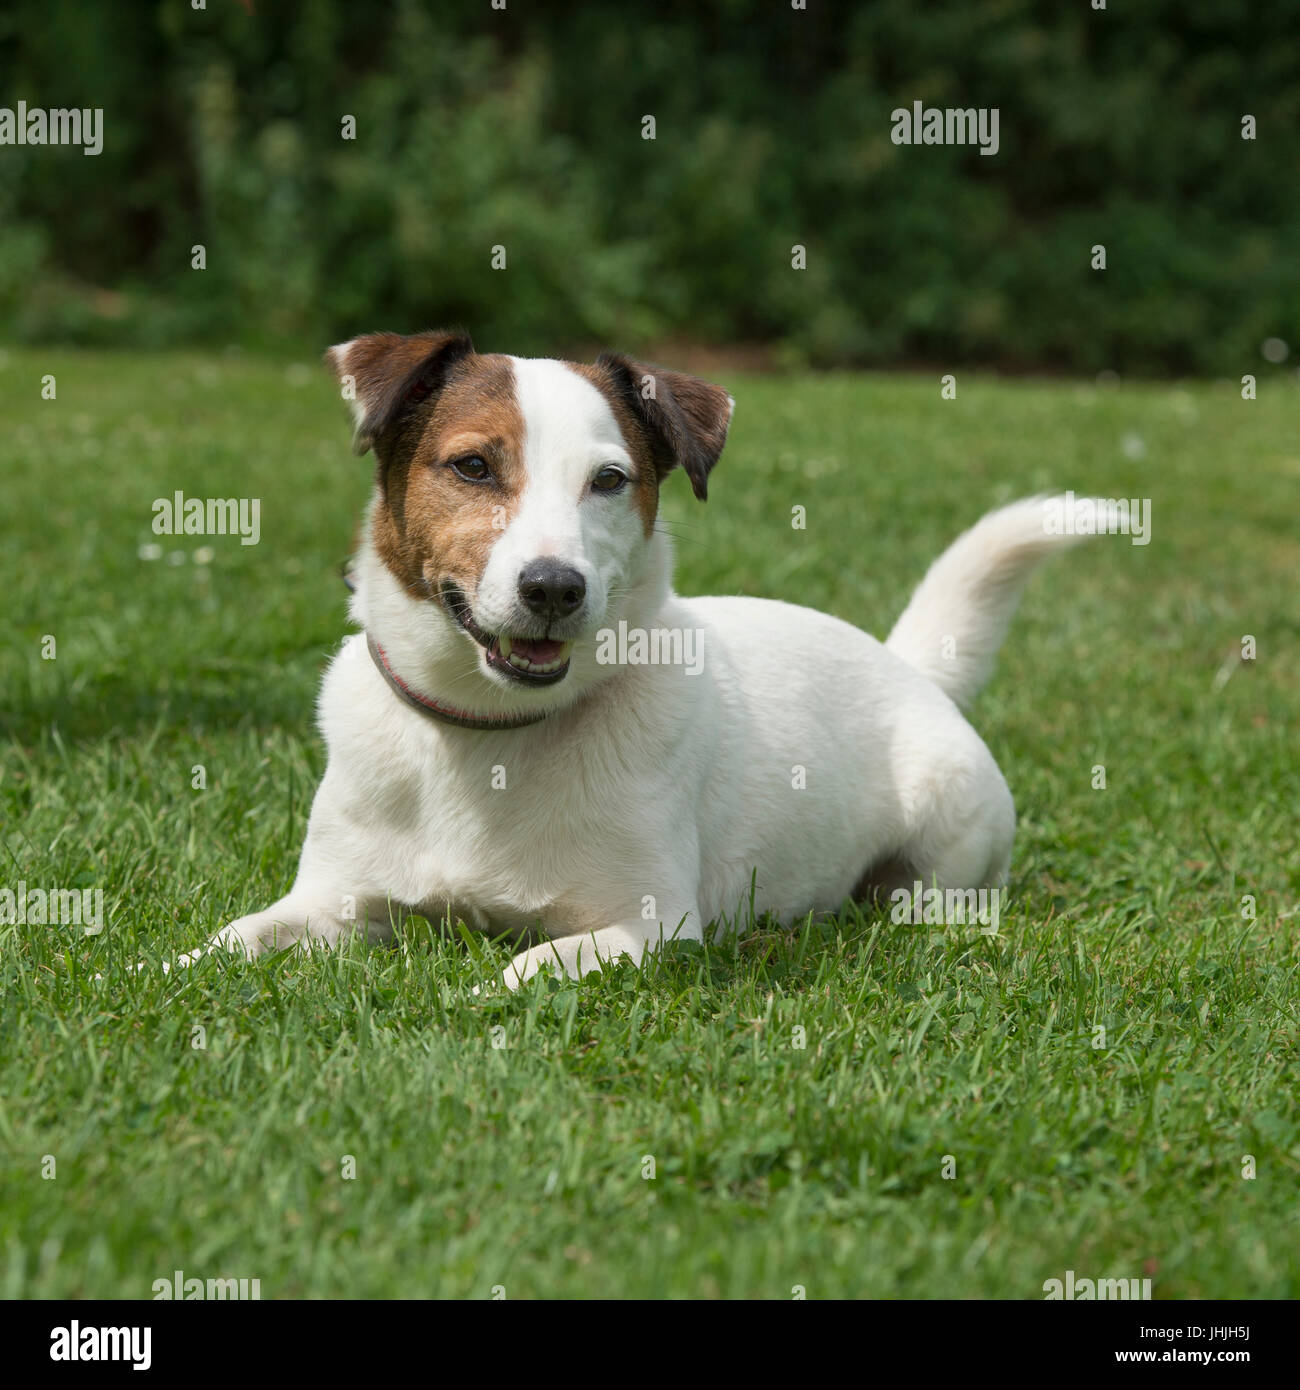 Scruffy Jack Russell High Resolution Stock Photography and Images - Alamy